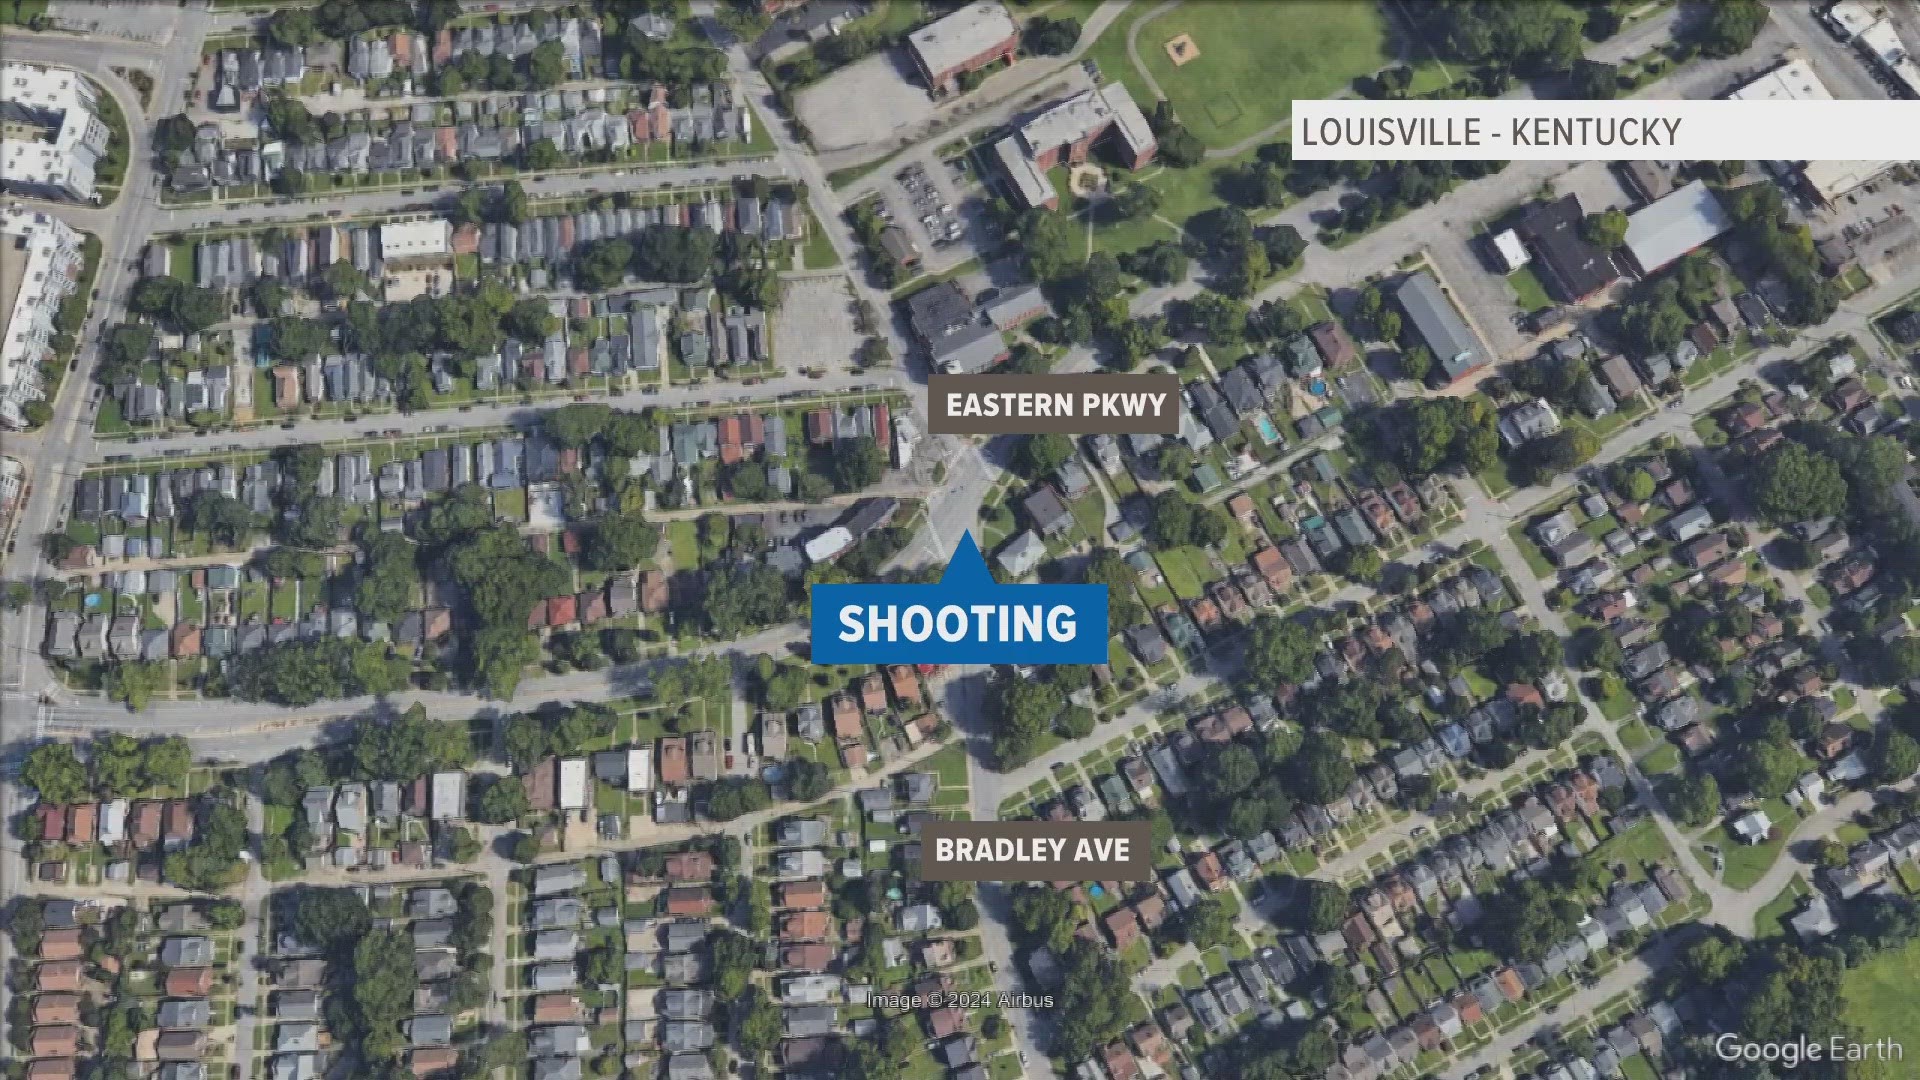 Police said the victim was shot near the area of Eastern Parkway and Bradley Avenue on the evening of March 30.